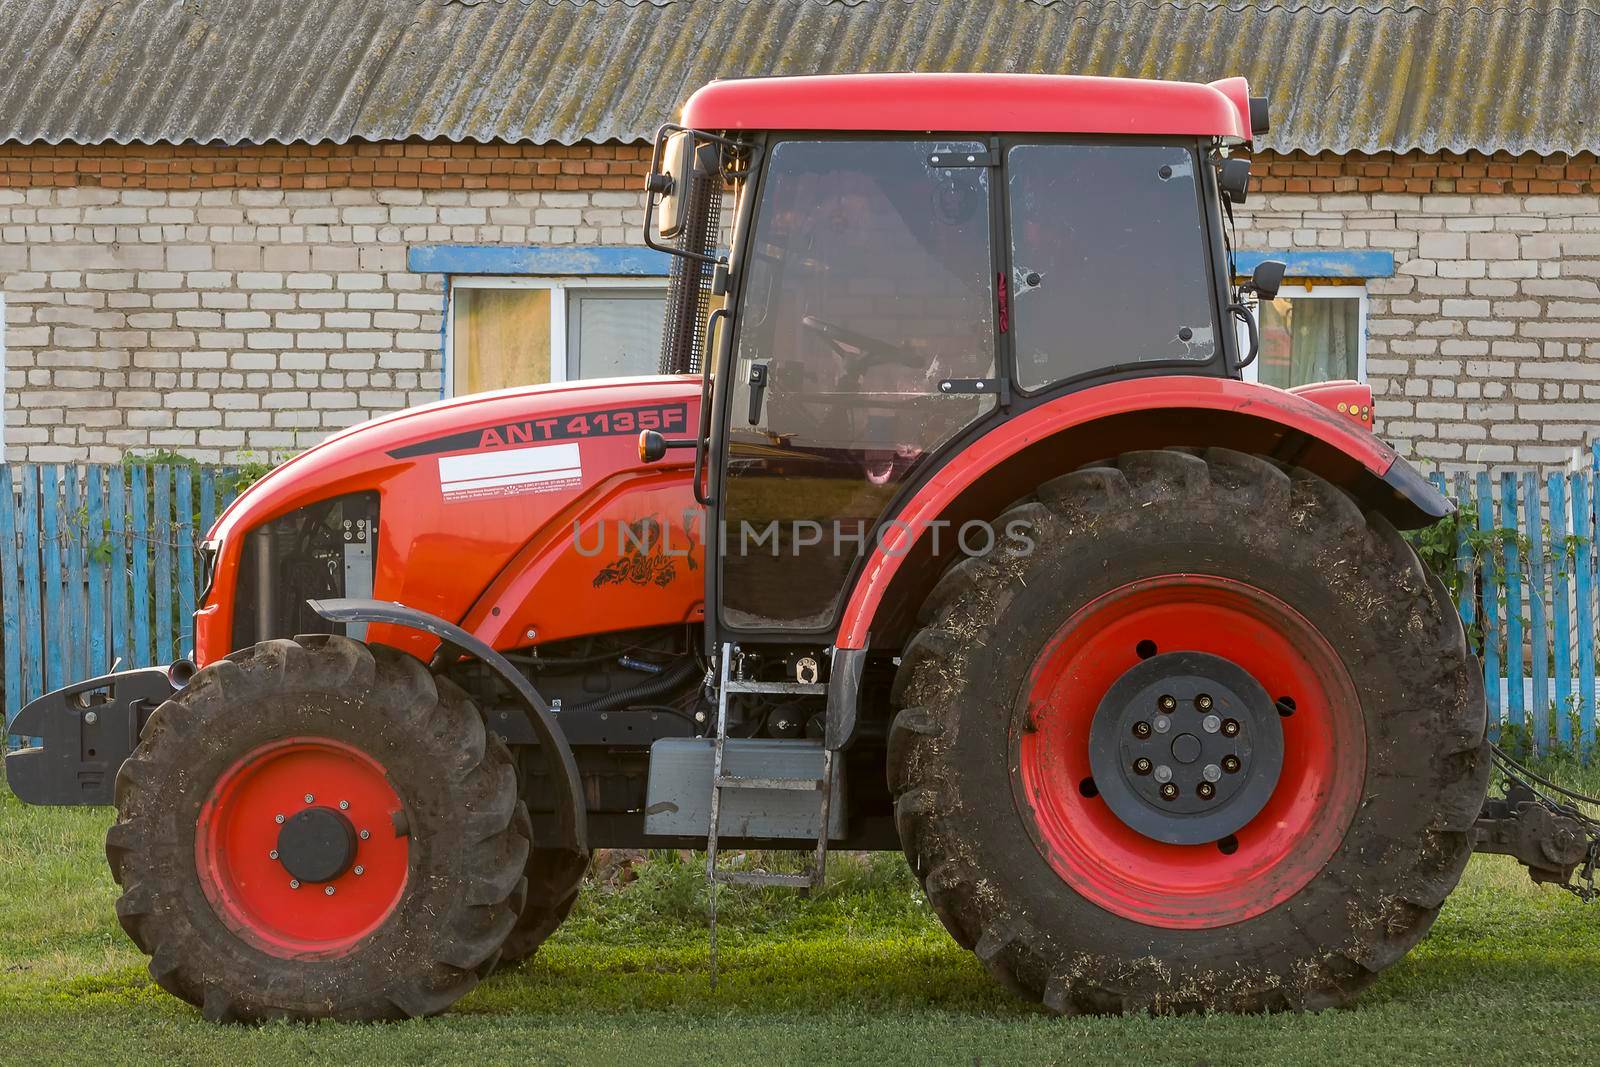 Red new wheeled tractor of medium size. Bashkortostan, Russia - 12 June, 2021. by Essffes